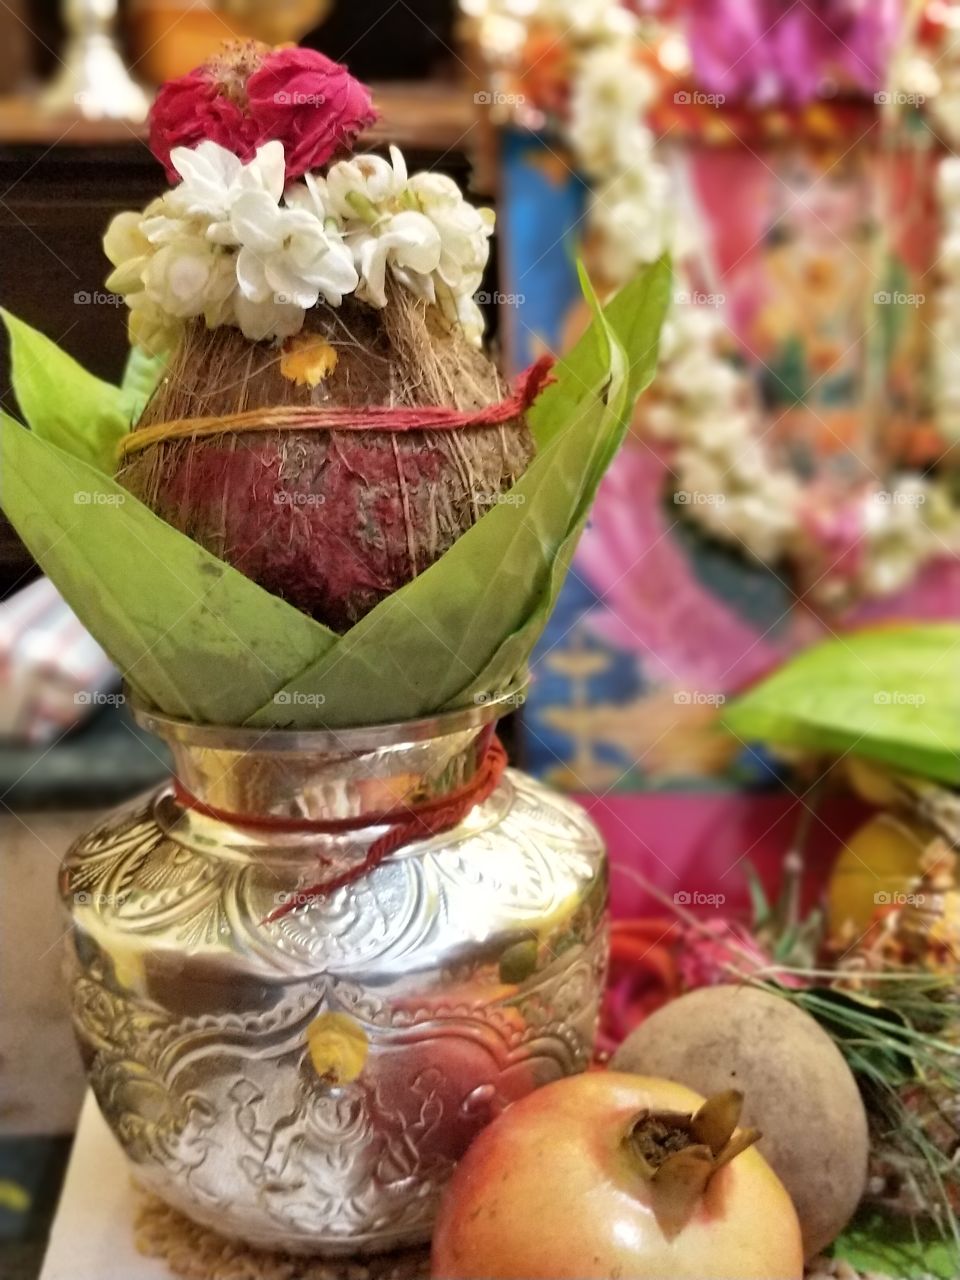 pooja and festival in India. coconut and bettel leaves